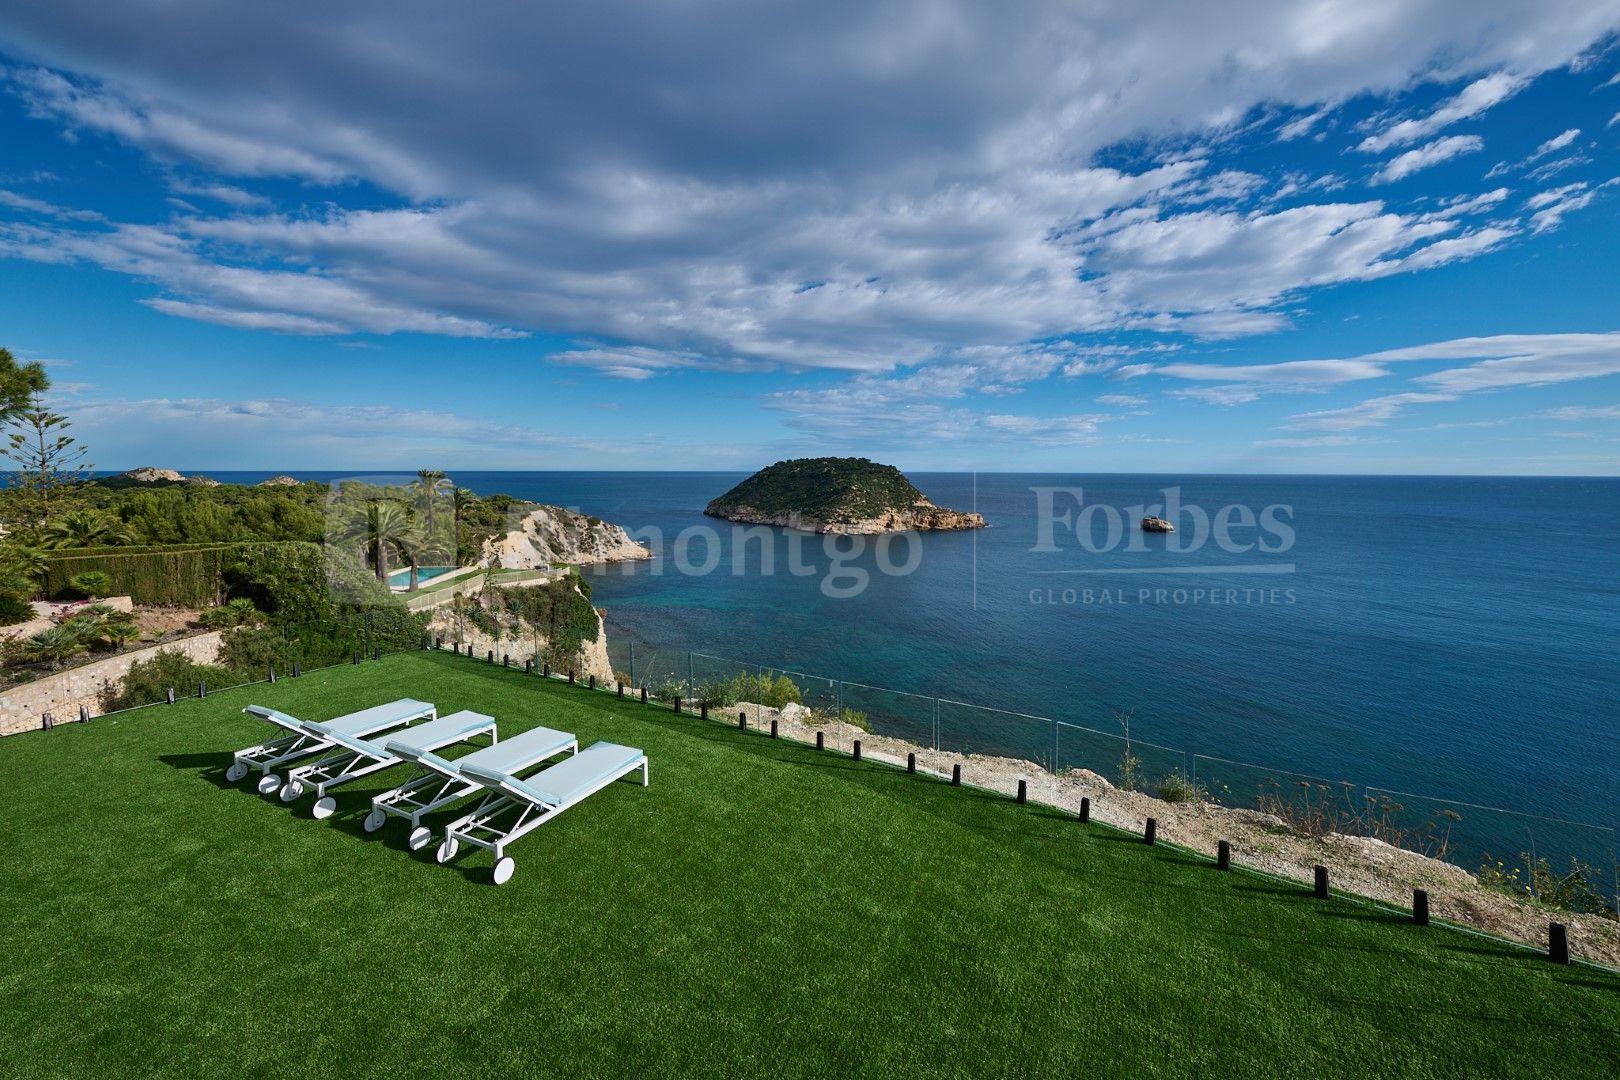 Exclusive and luxurious villa with stunning views of Portichol Island and the Mediterranean Sea.